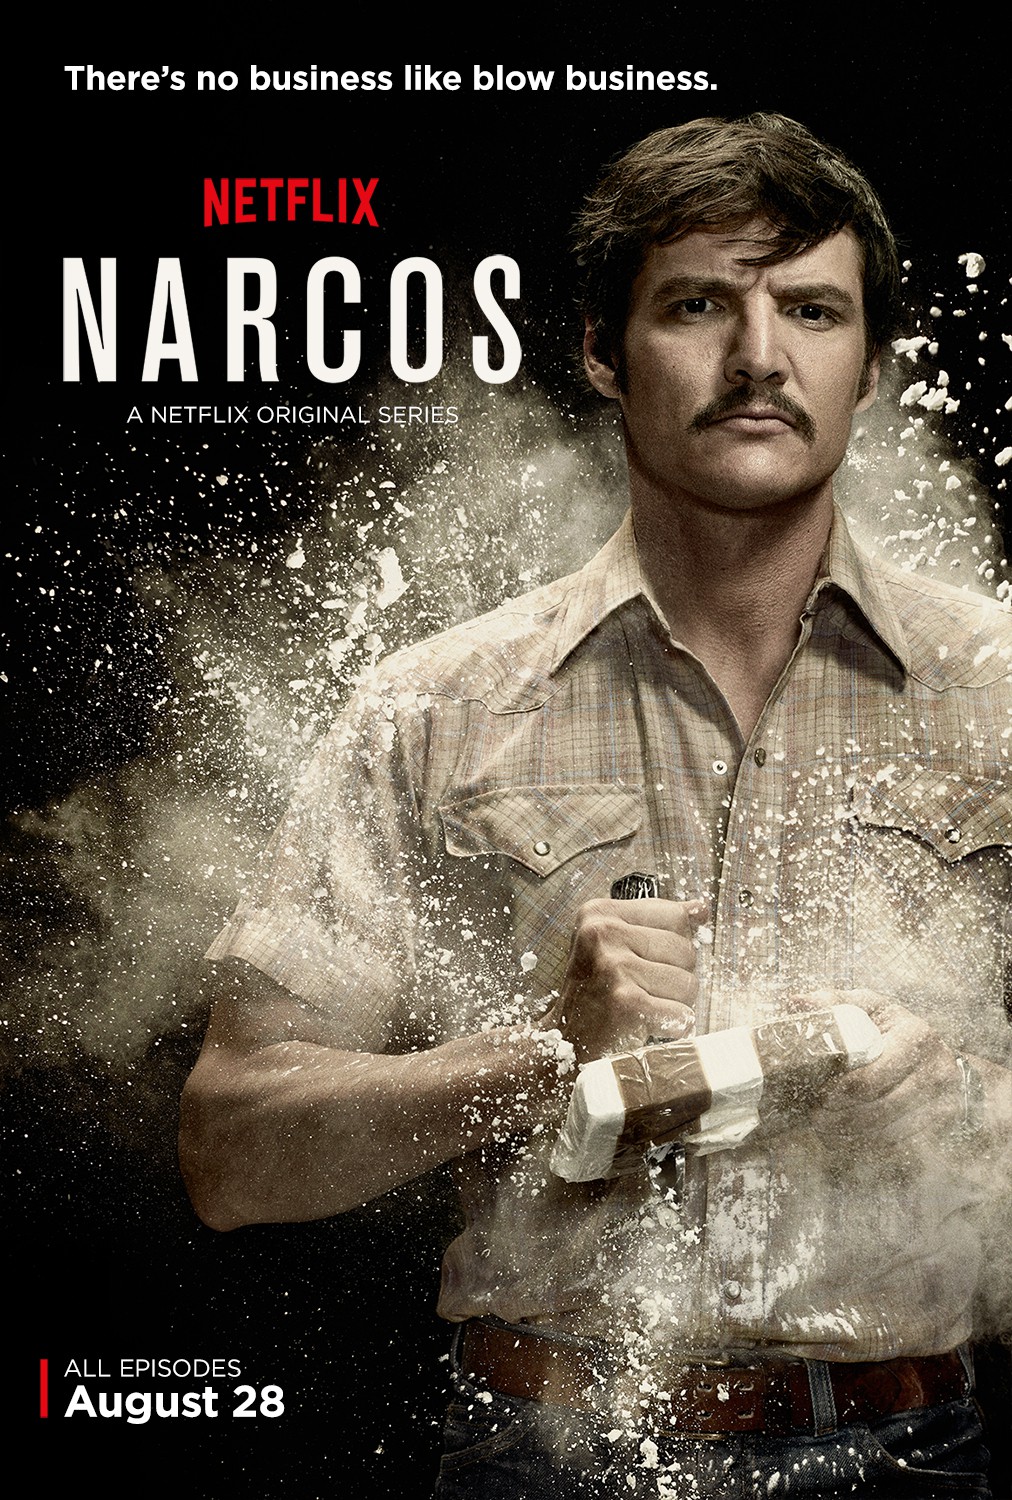 Pedro Pascal production stills from Narcos plus a few childhood photos of him